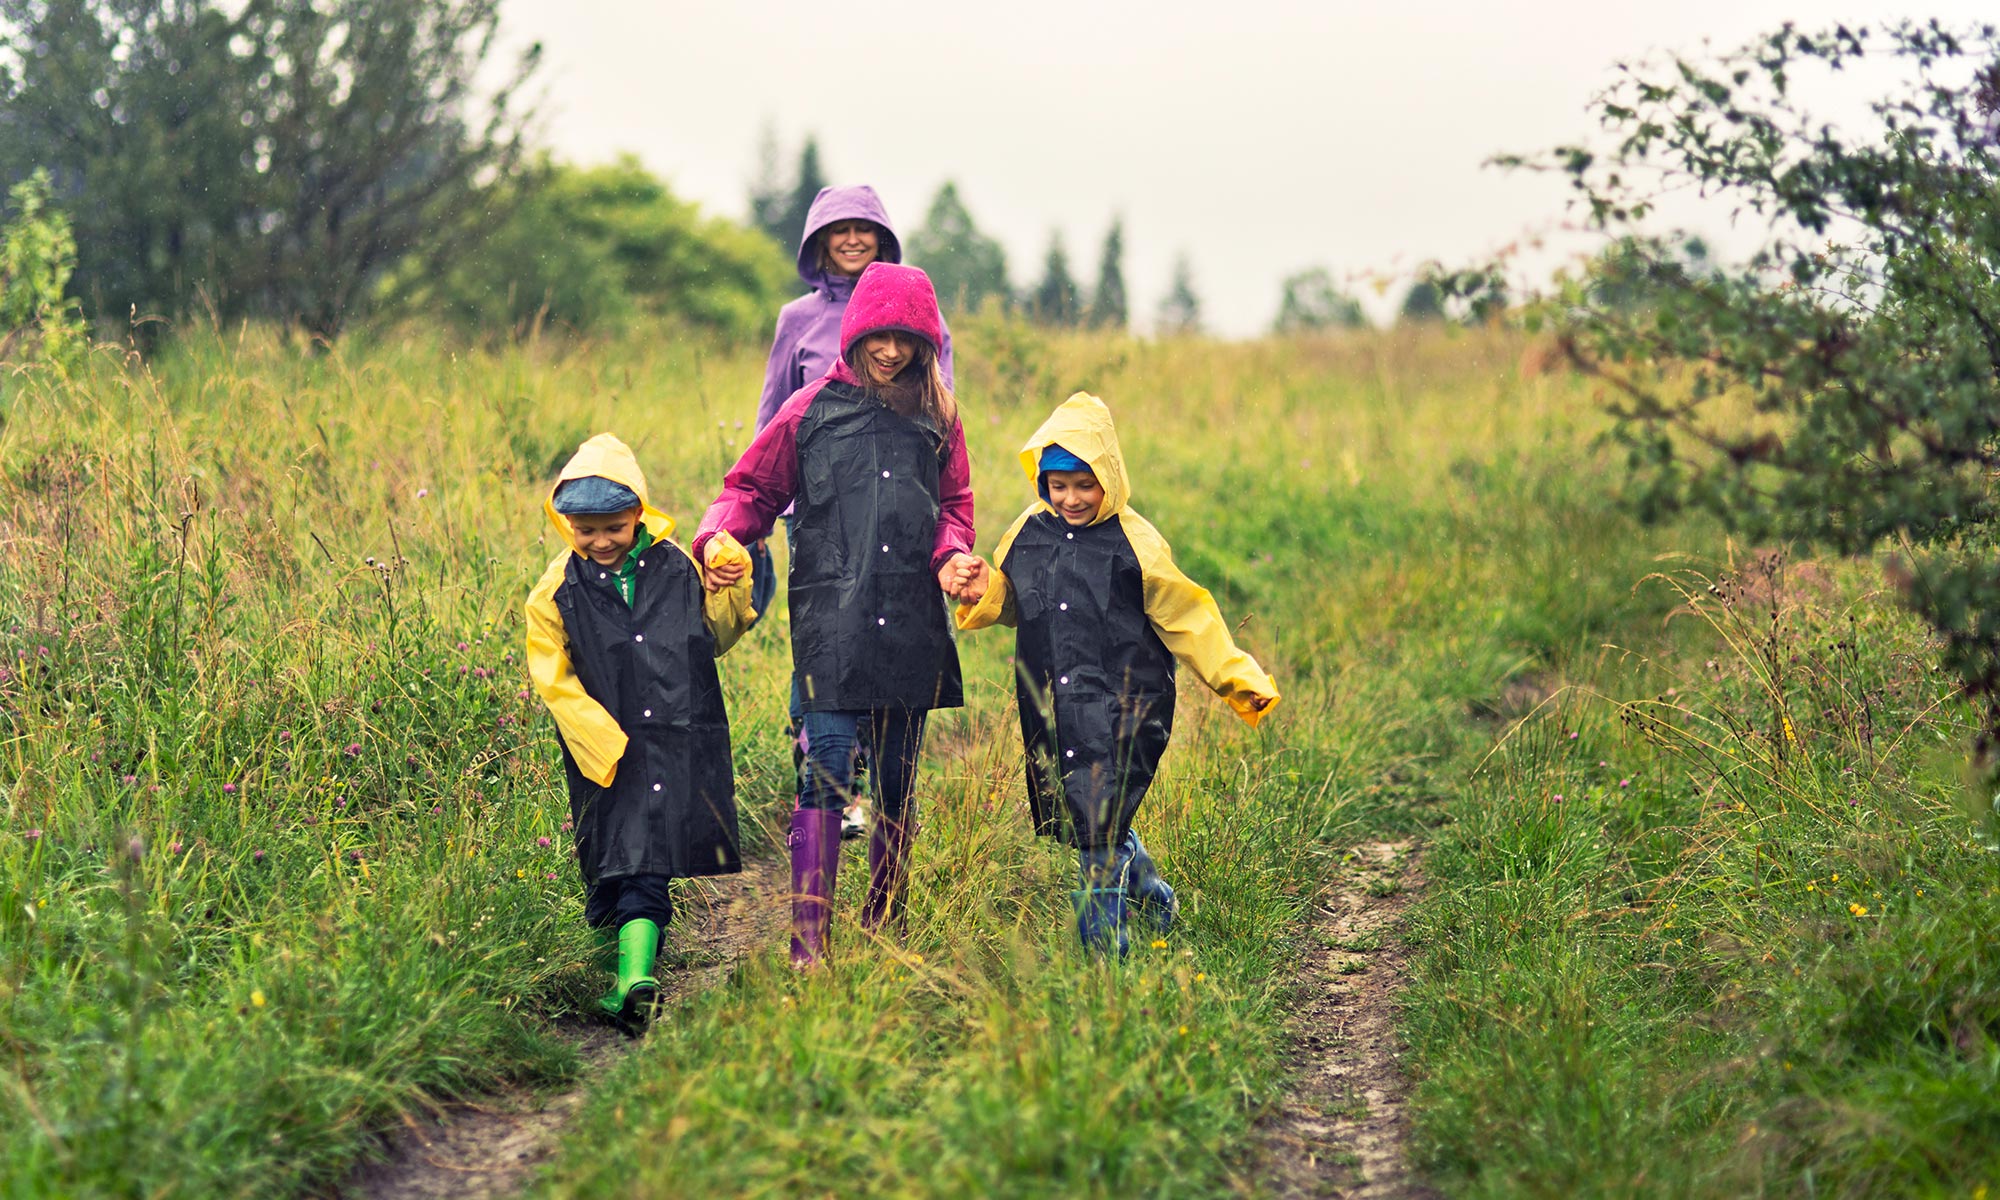 A family outdoors with raincoats on.